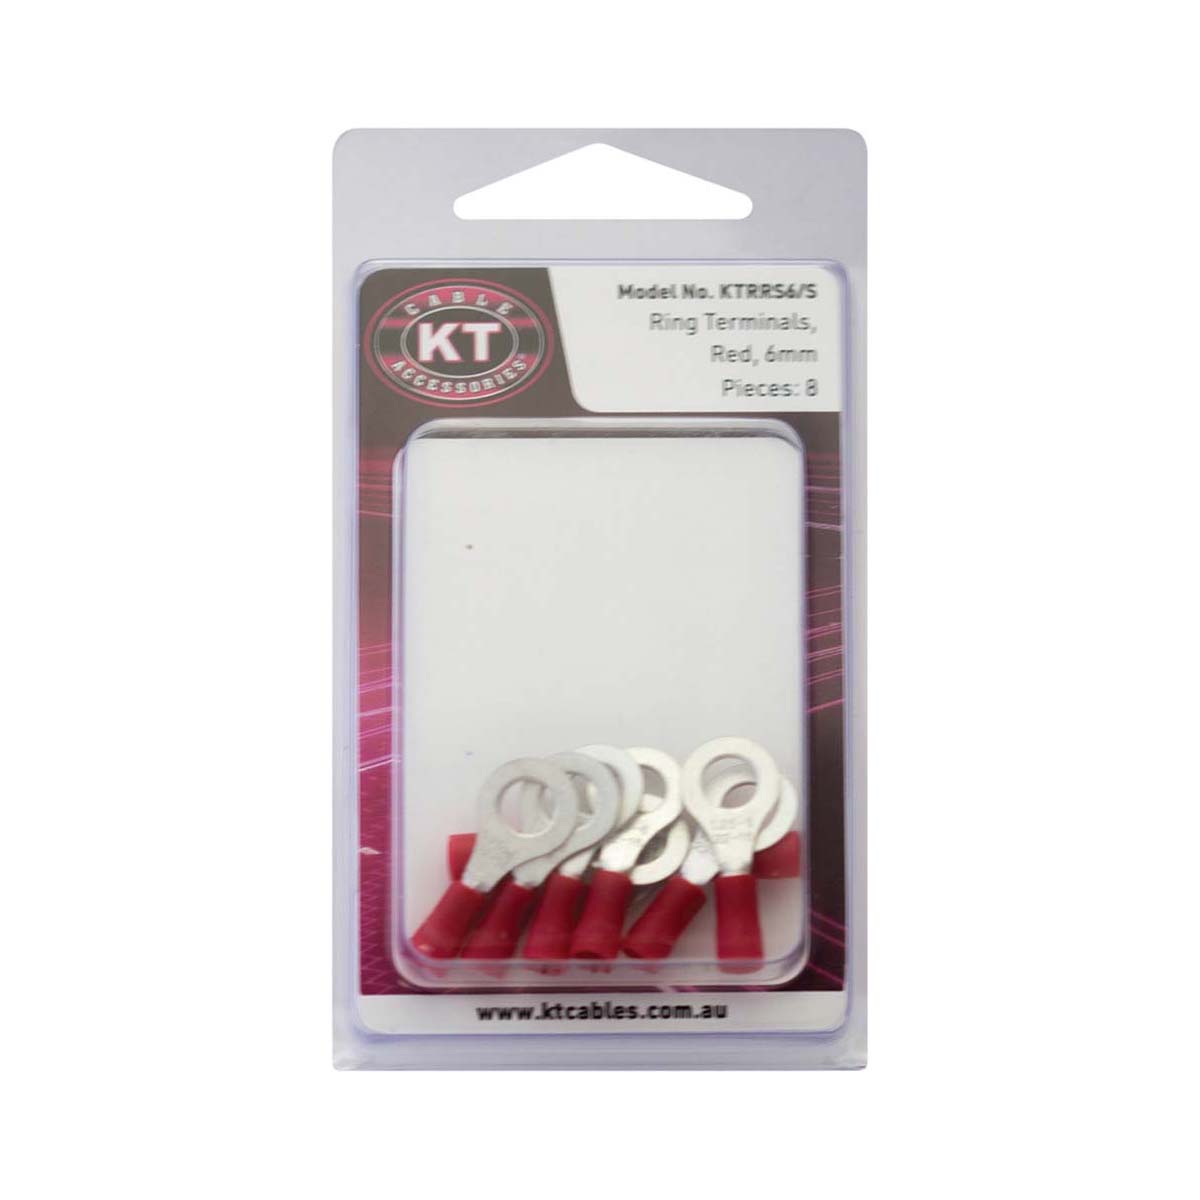 KT Cables Insulated Ring Terminal Red 2.5 6mm